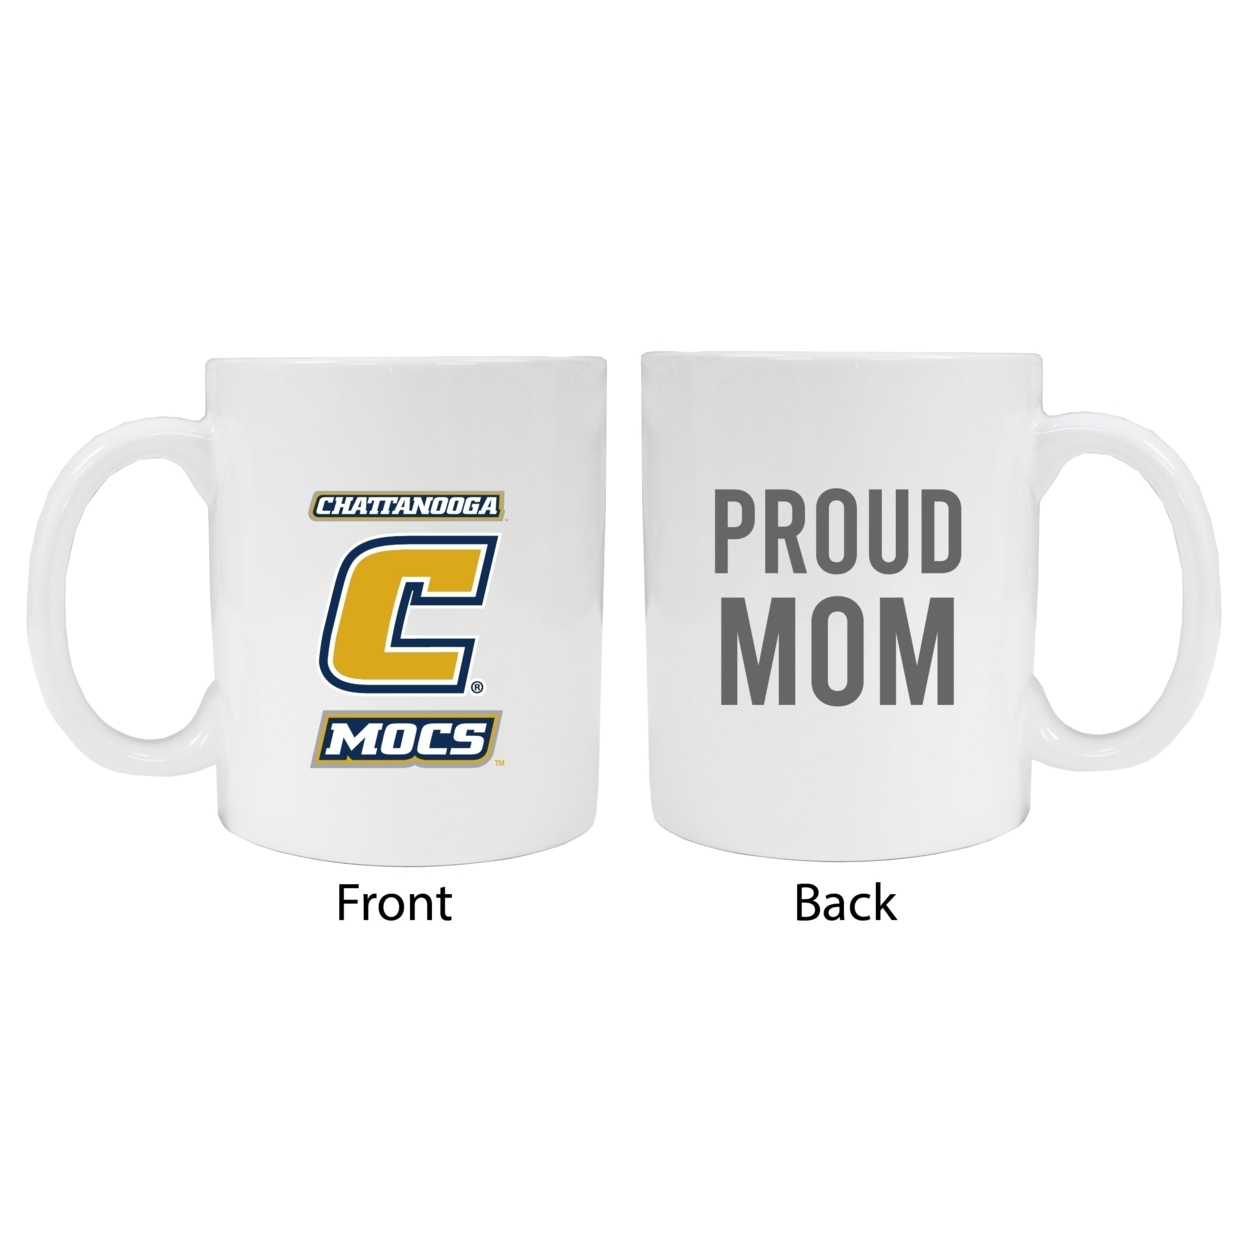 University Of Tennessee At Chattanooga Proud Mom Ceramic Coffee Mug - White (2 Pack)